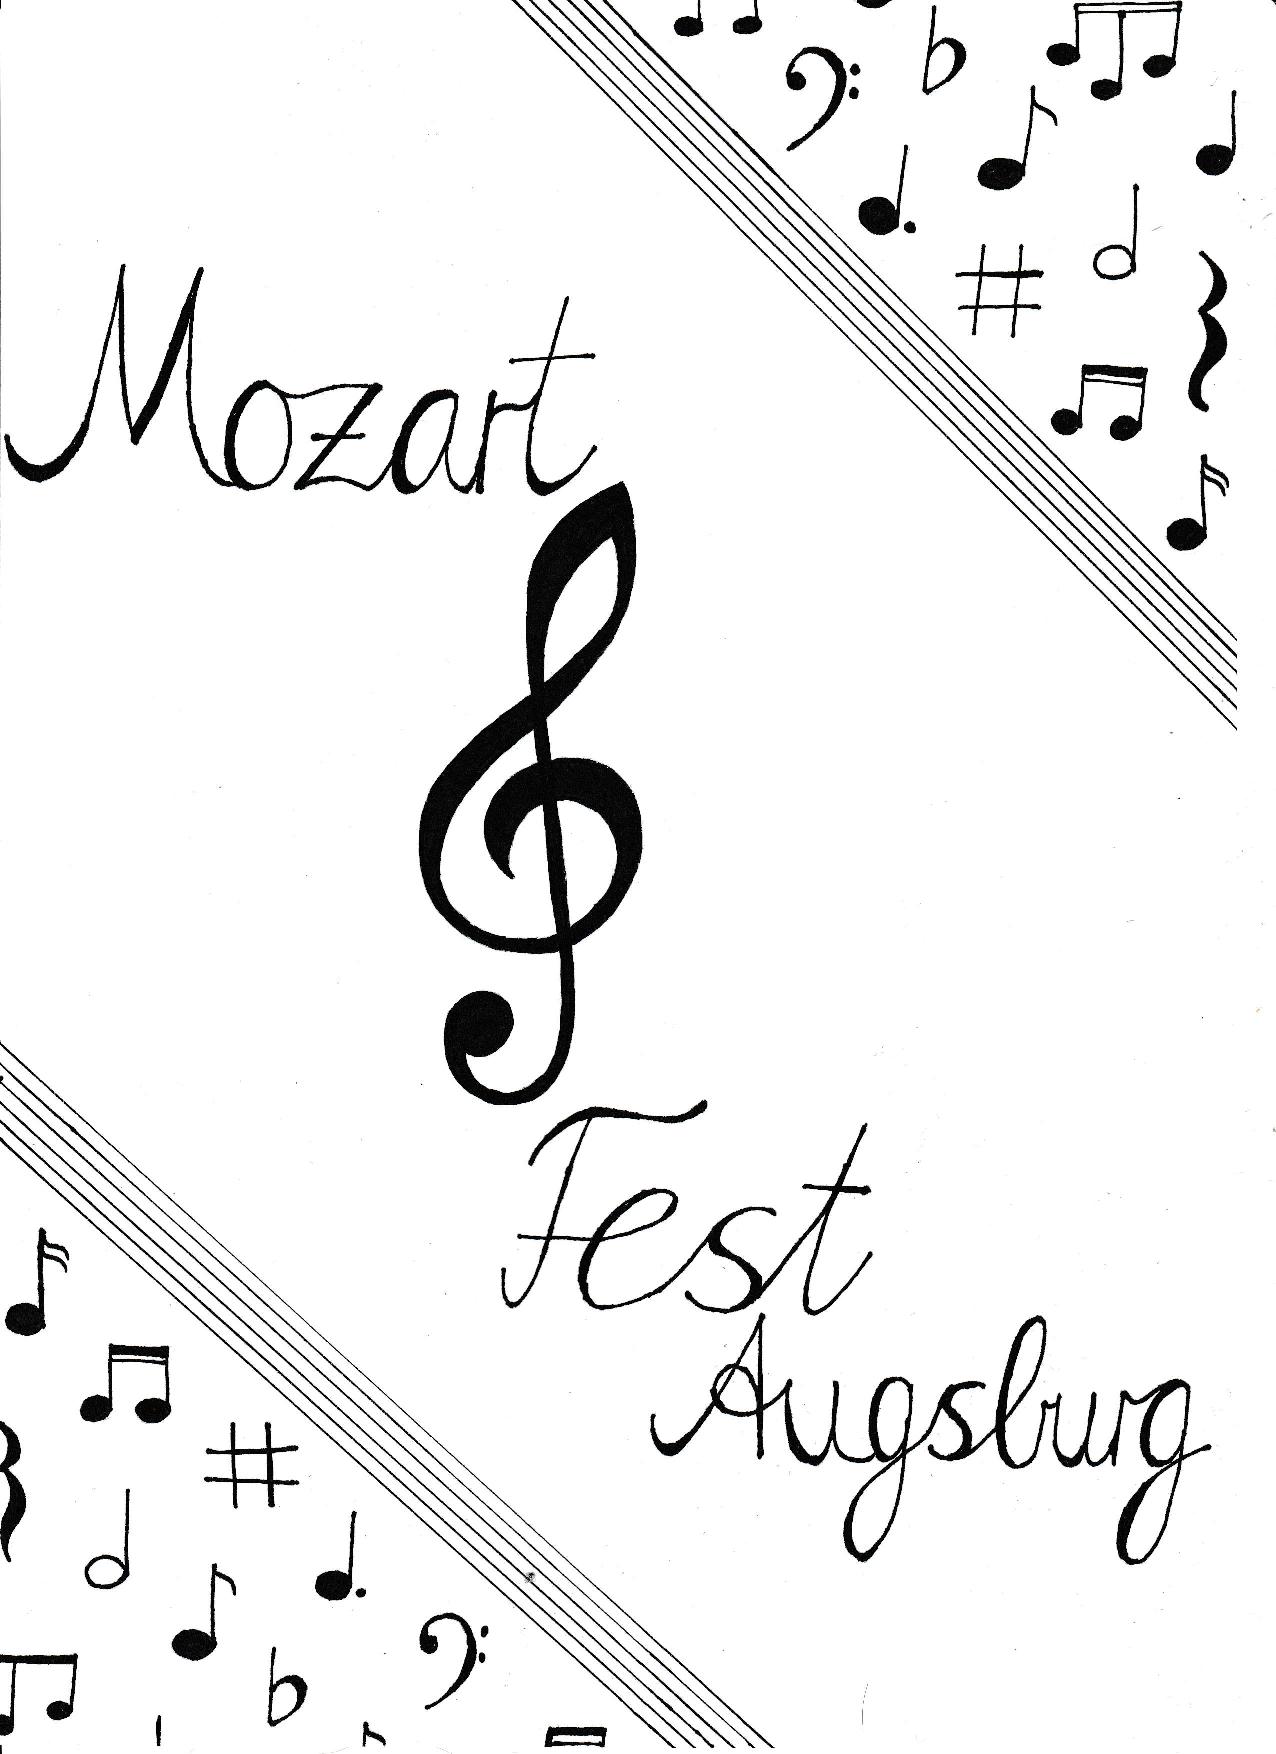 What do you know about Mozart?